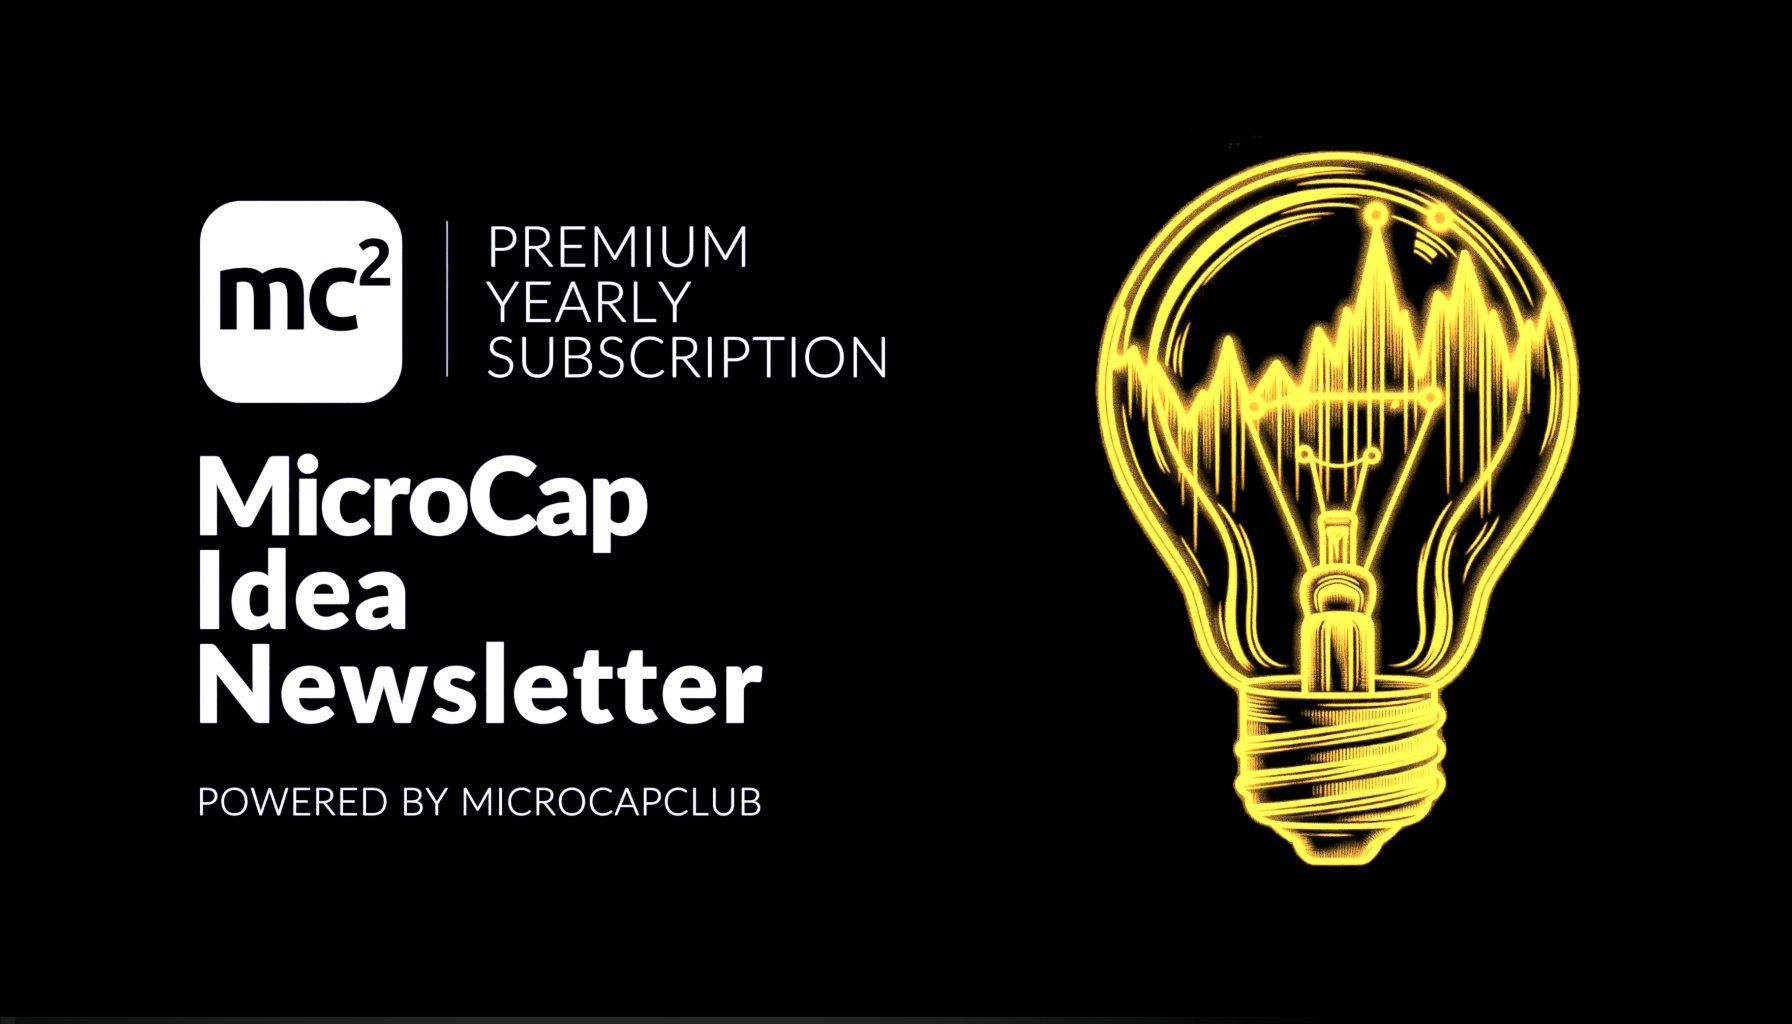 ANNOUNCEMENT: The Launch of the Microcap Idea Newsletter!